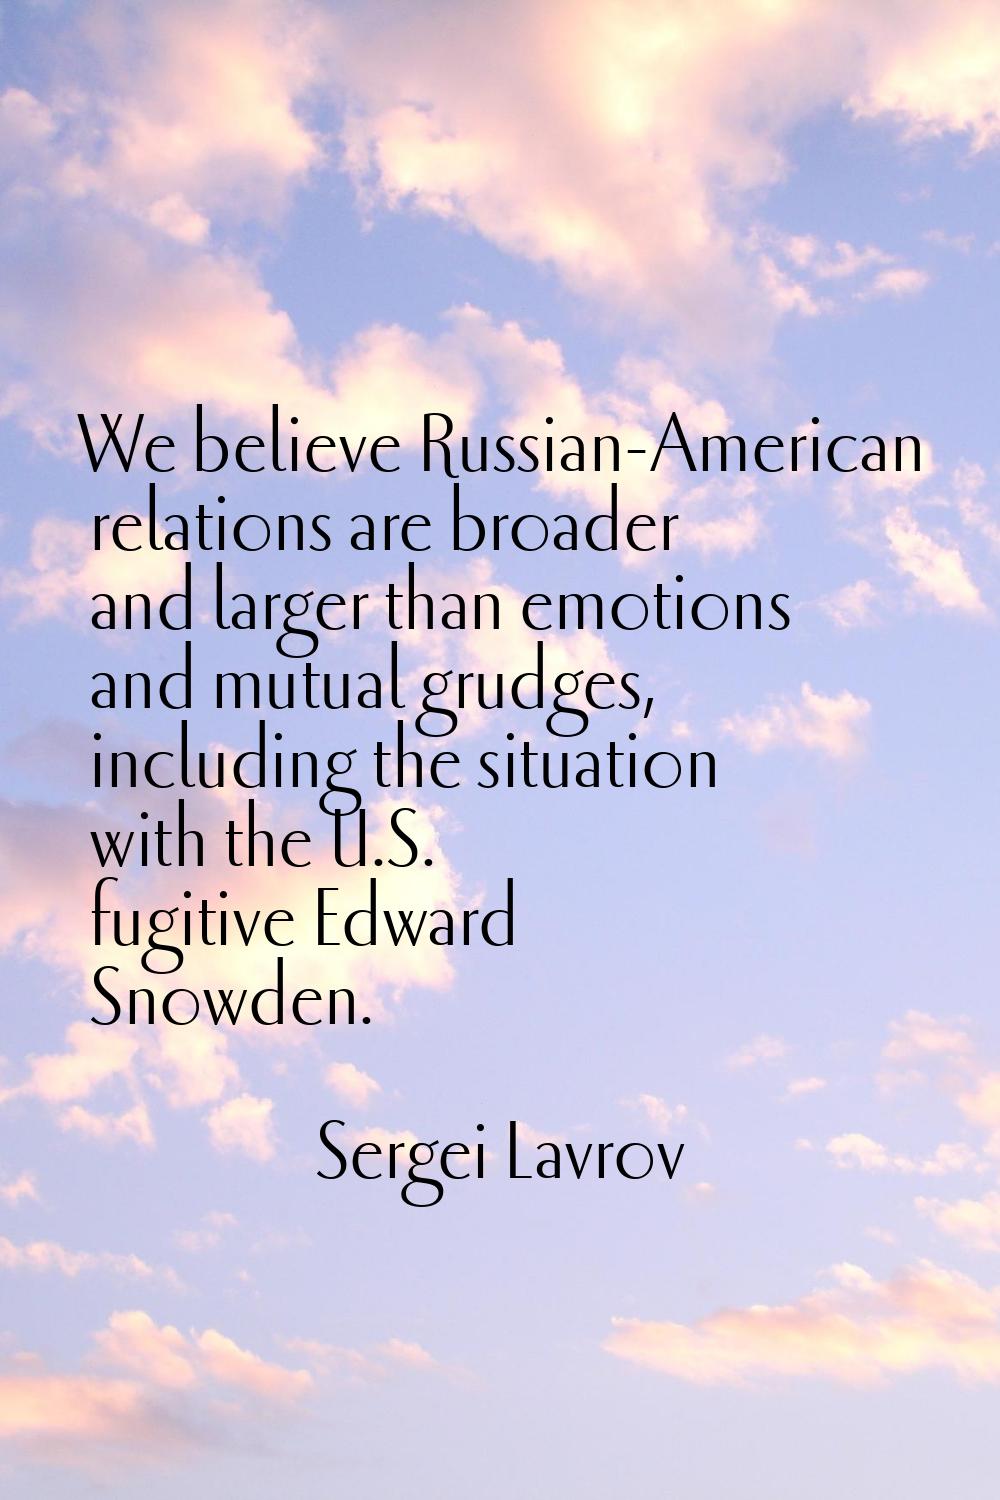 We believe Russian-American relations are broader and larger than emotions and mutual grudges, incl